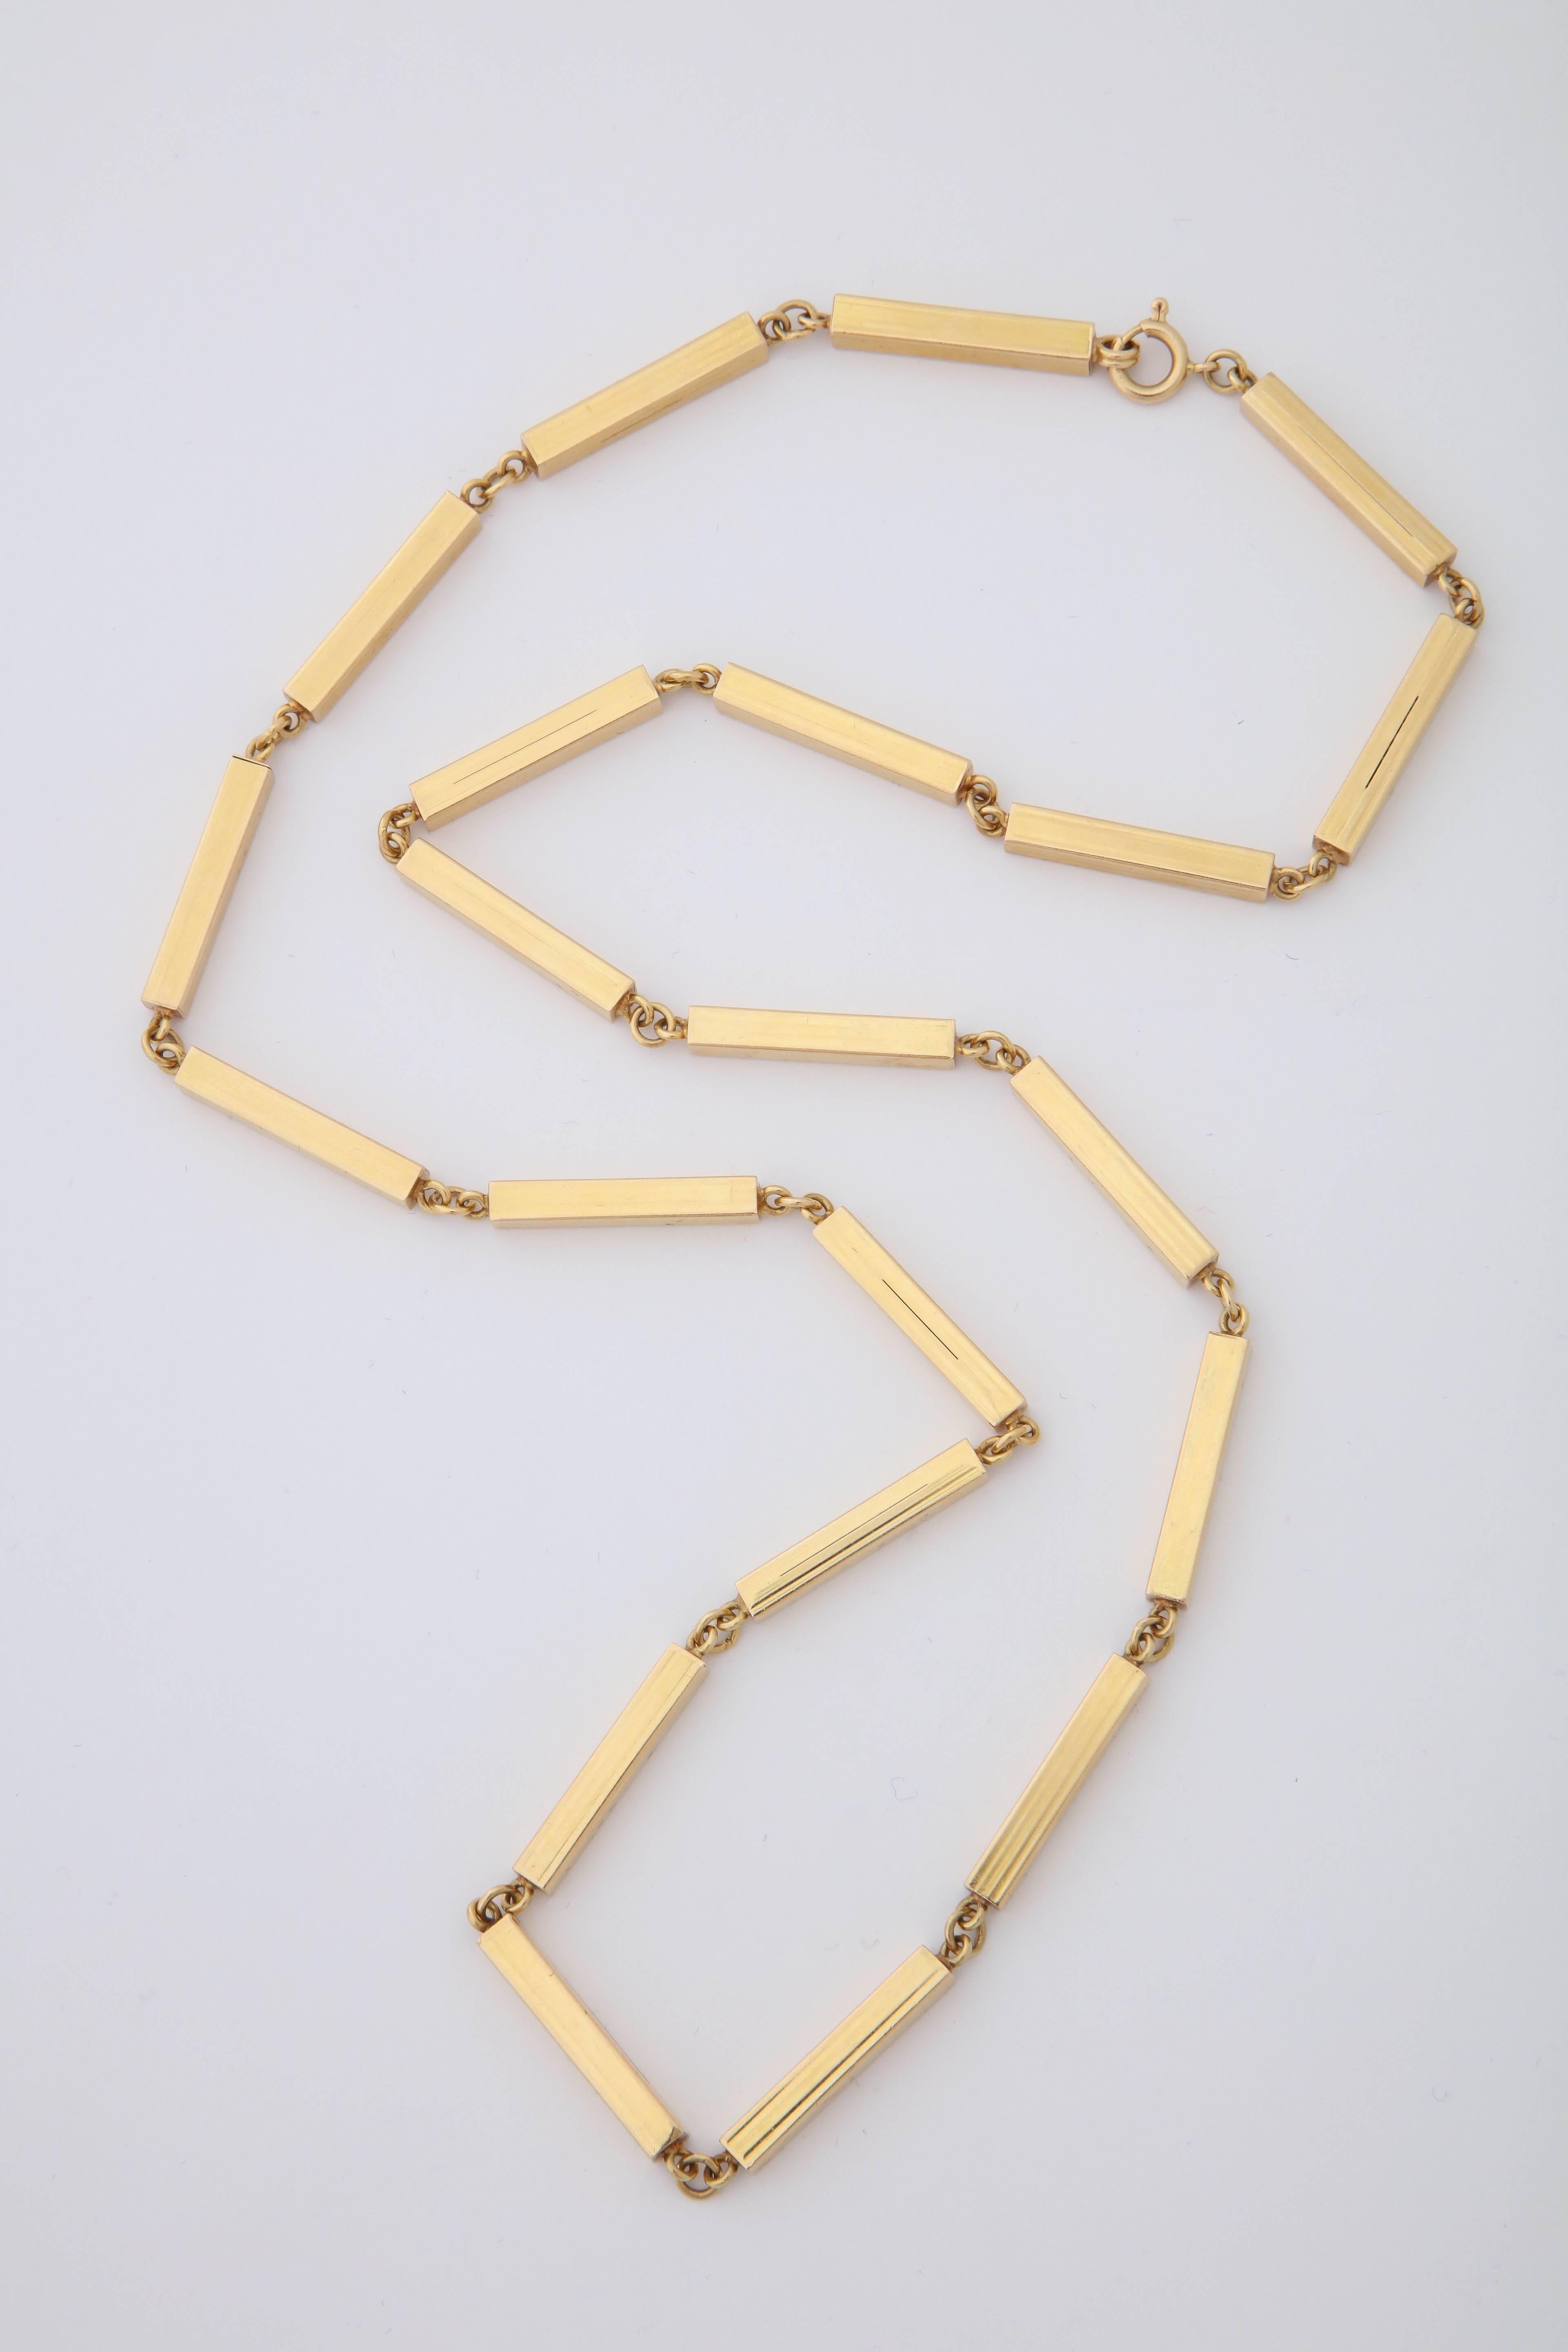 One Unisex Chain Link Necklace Composed Of Twenty One Vertical Three Dimensional Box Links. Each Link Measuring Approximately 1.25 inches long.With Easy Spring And Jump Ring Closure Designed In Italy In The 1980's. Stamped 750 Italy.Gold Work Has